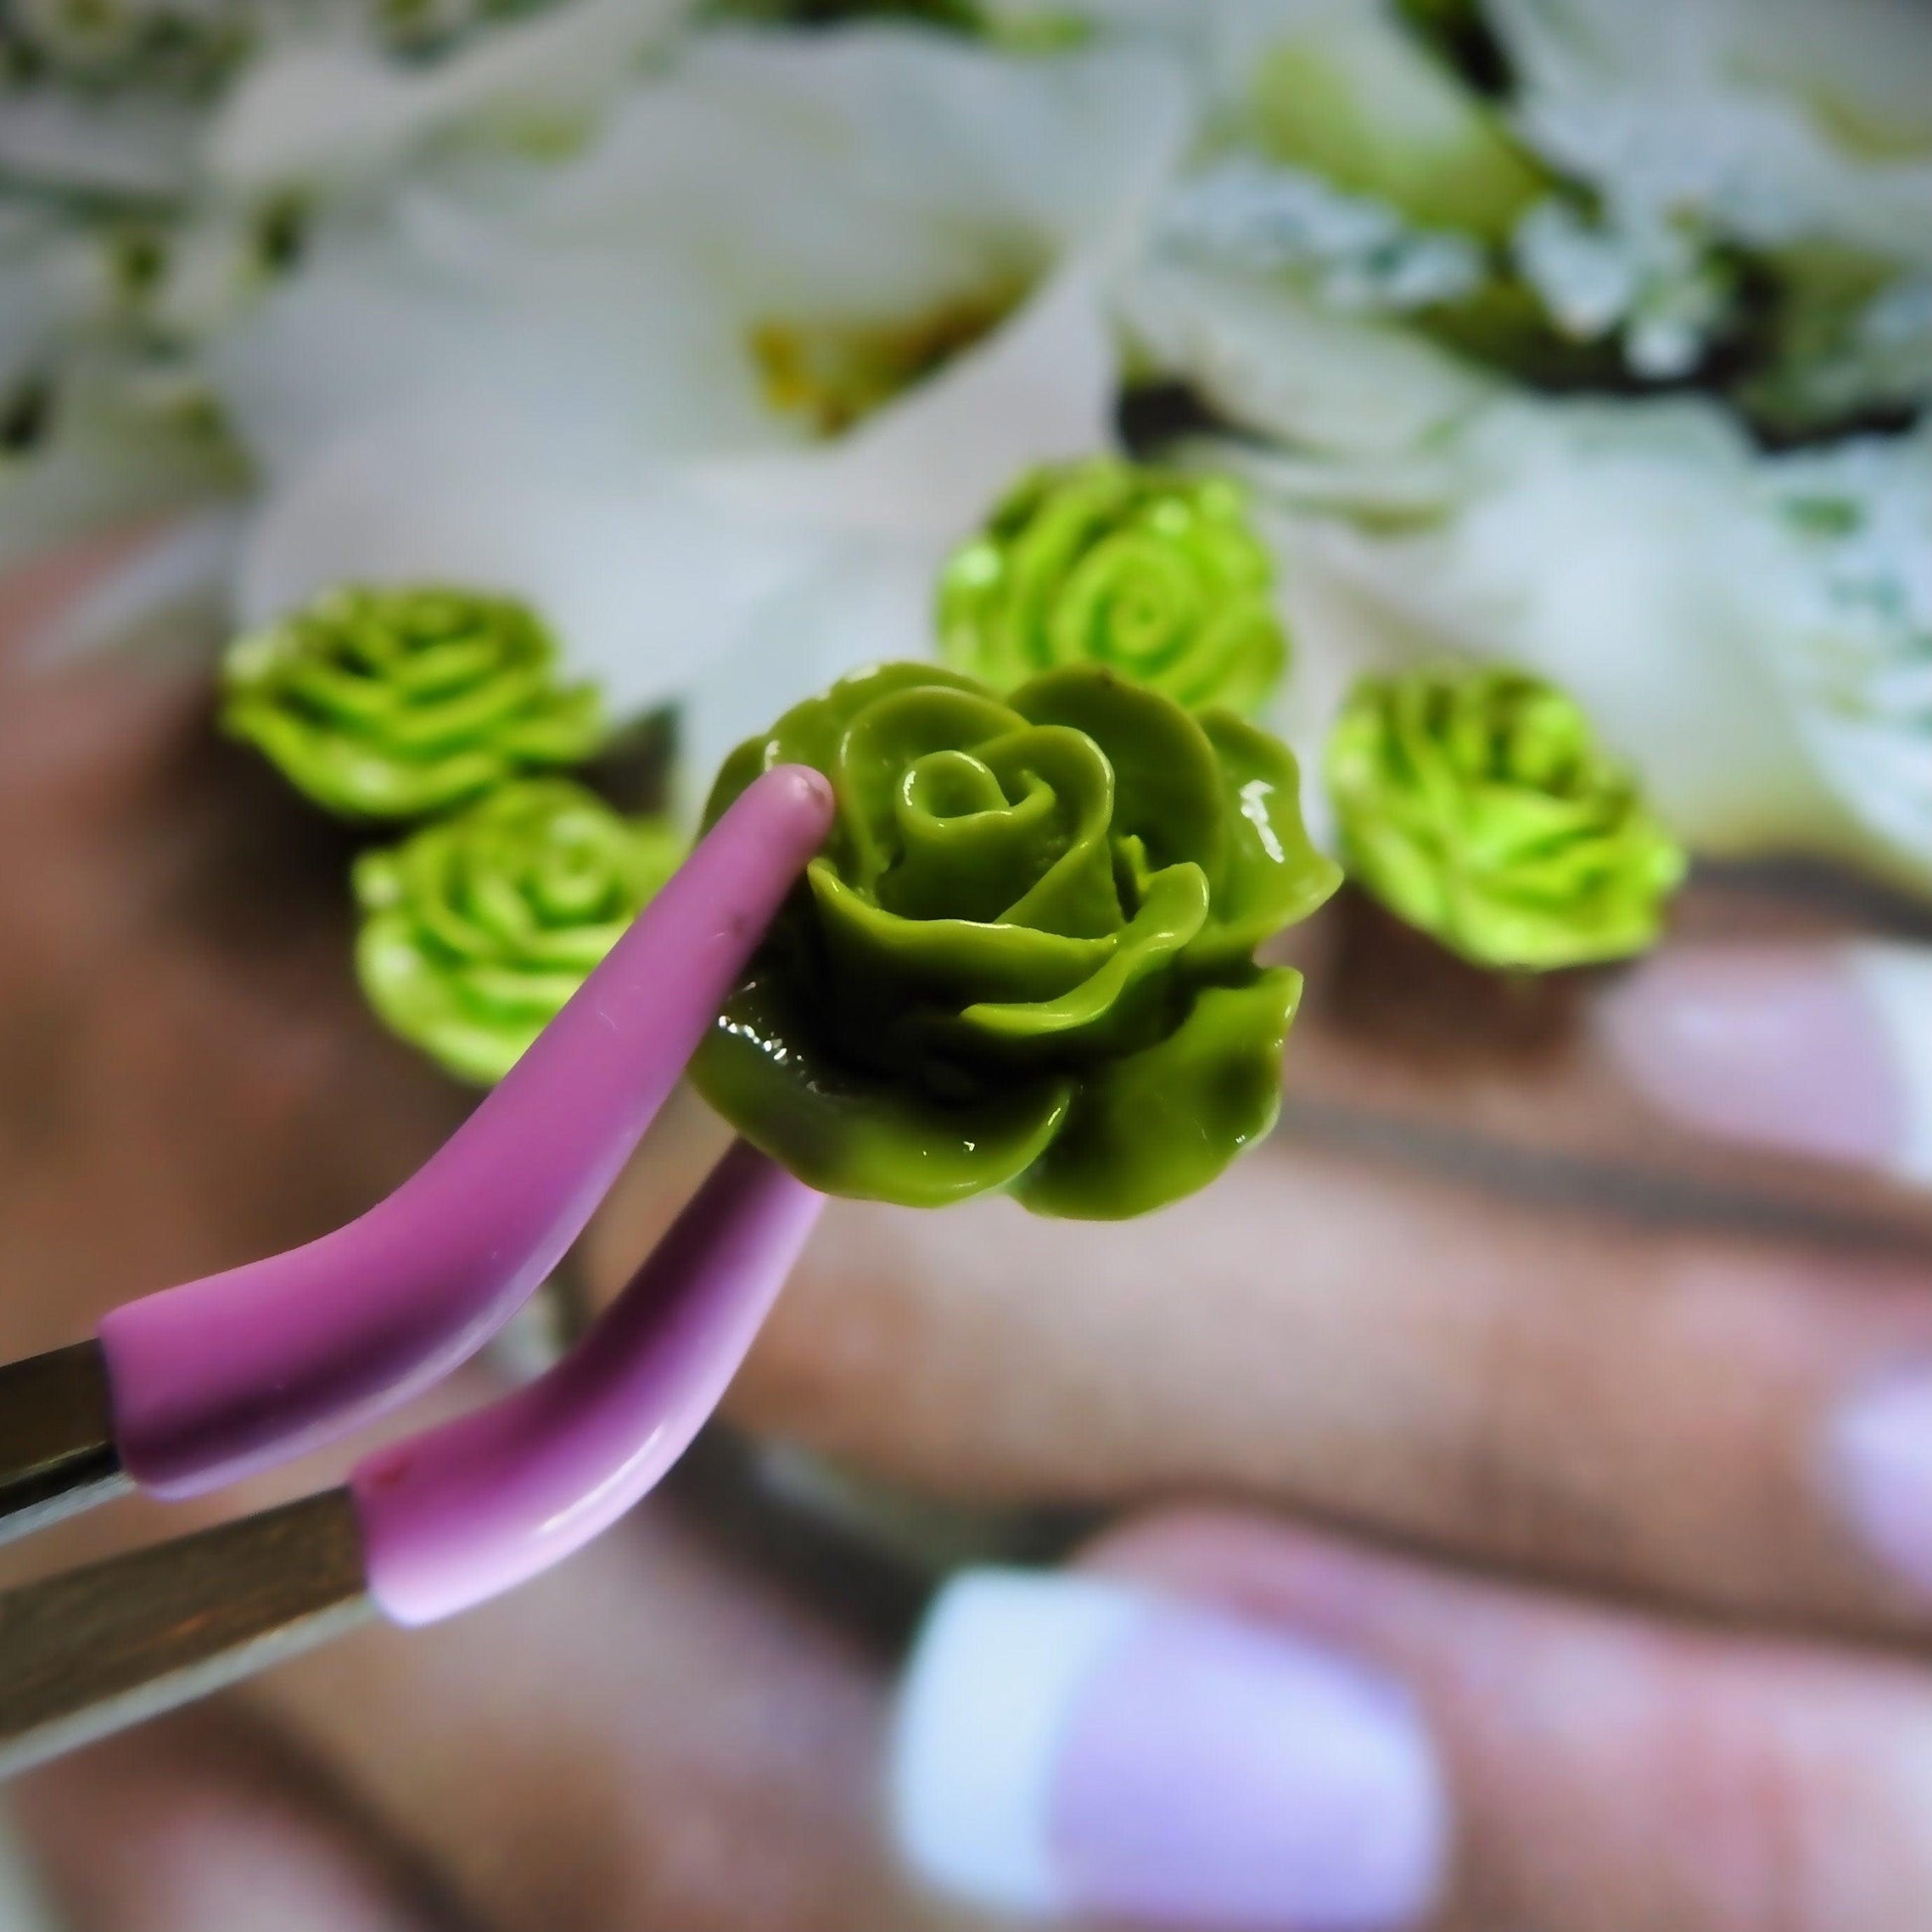 Fancy flower buttons with shank for sewing, button earrings and bracelets. Green colored rose shaped resin buttons for decorating bouquet